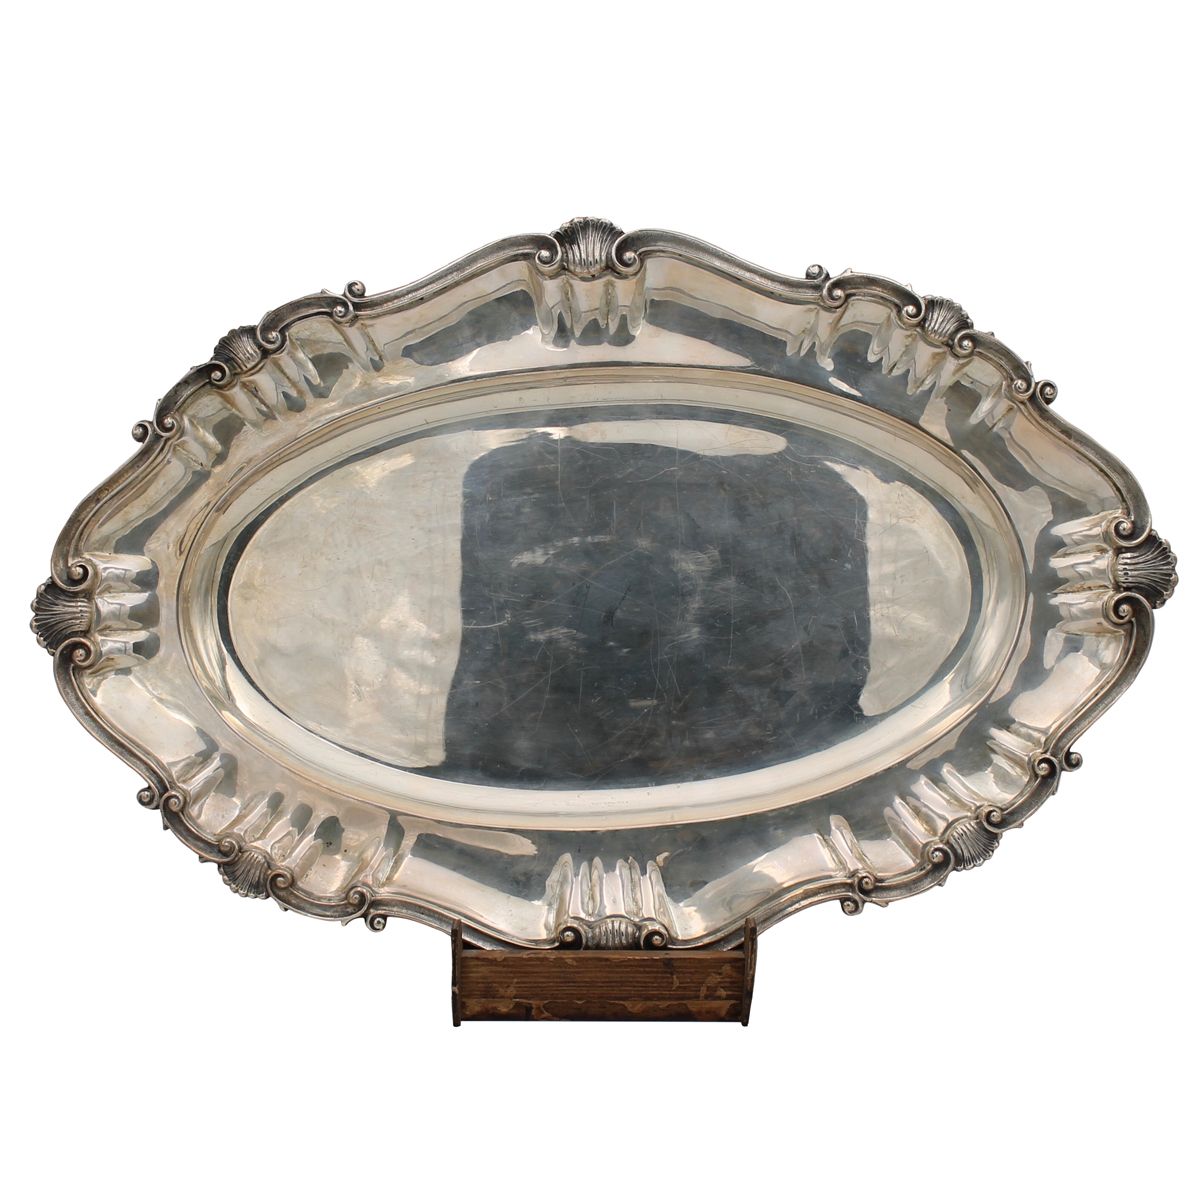 QUATTRO VASSOI OVALI - FOUR OVAL TRAYS Engraved and embossed 925 silver. 20th ce&hellip;